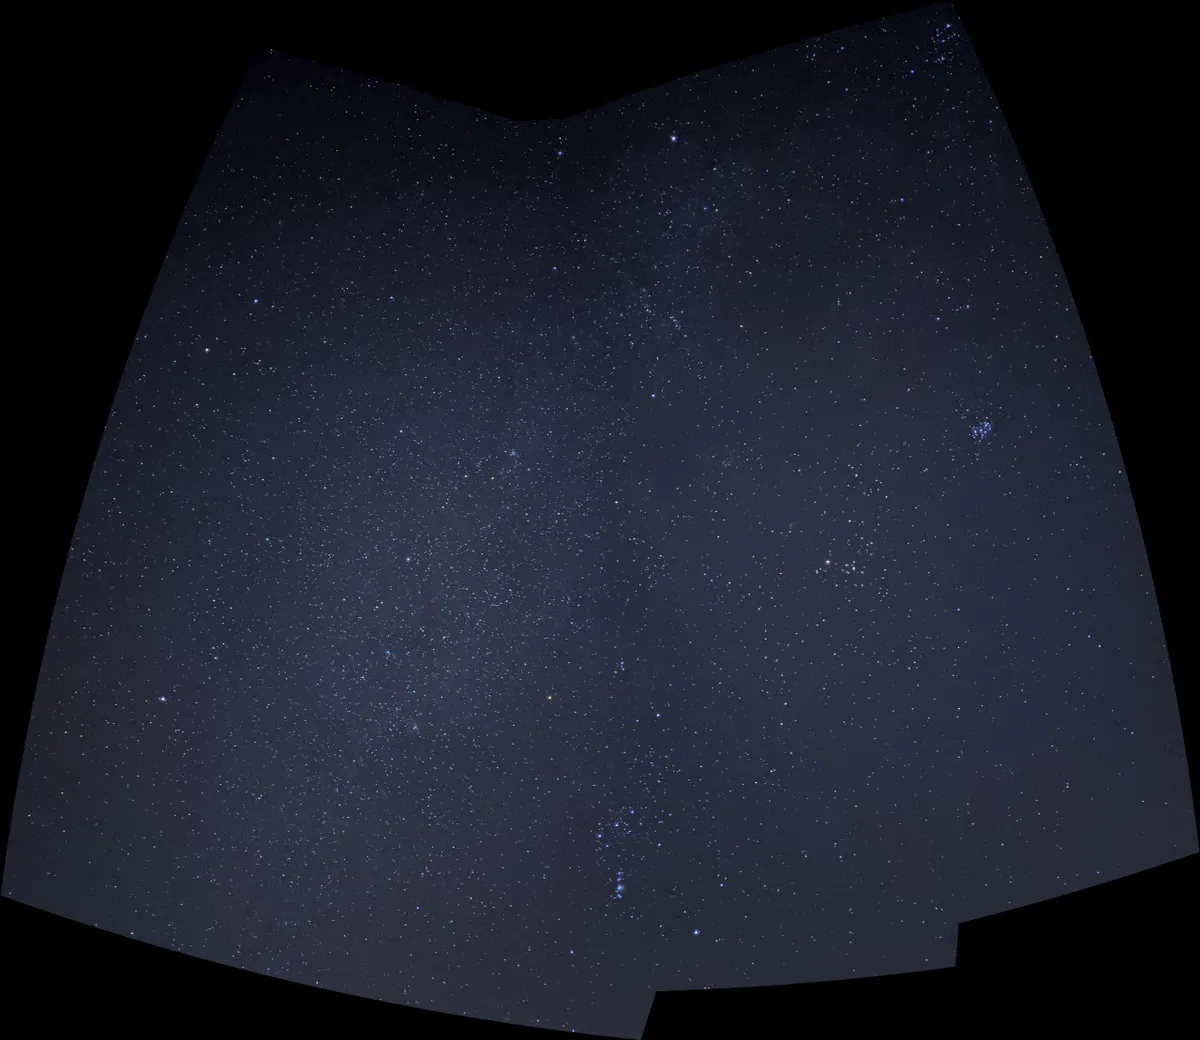 A 4-pane view of winter constellations using the Google Pixel 4 at a darker location. Credit: Paul Money